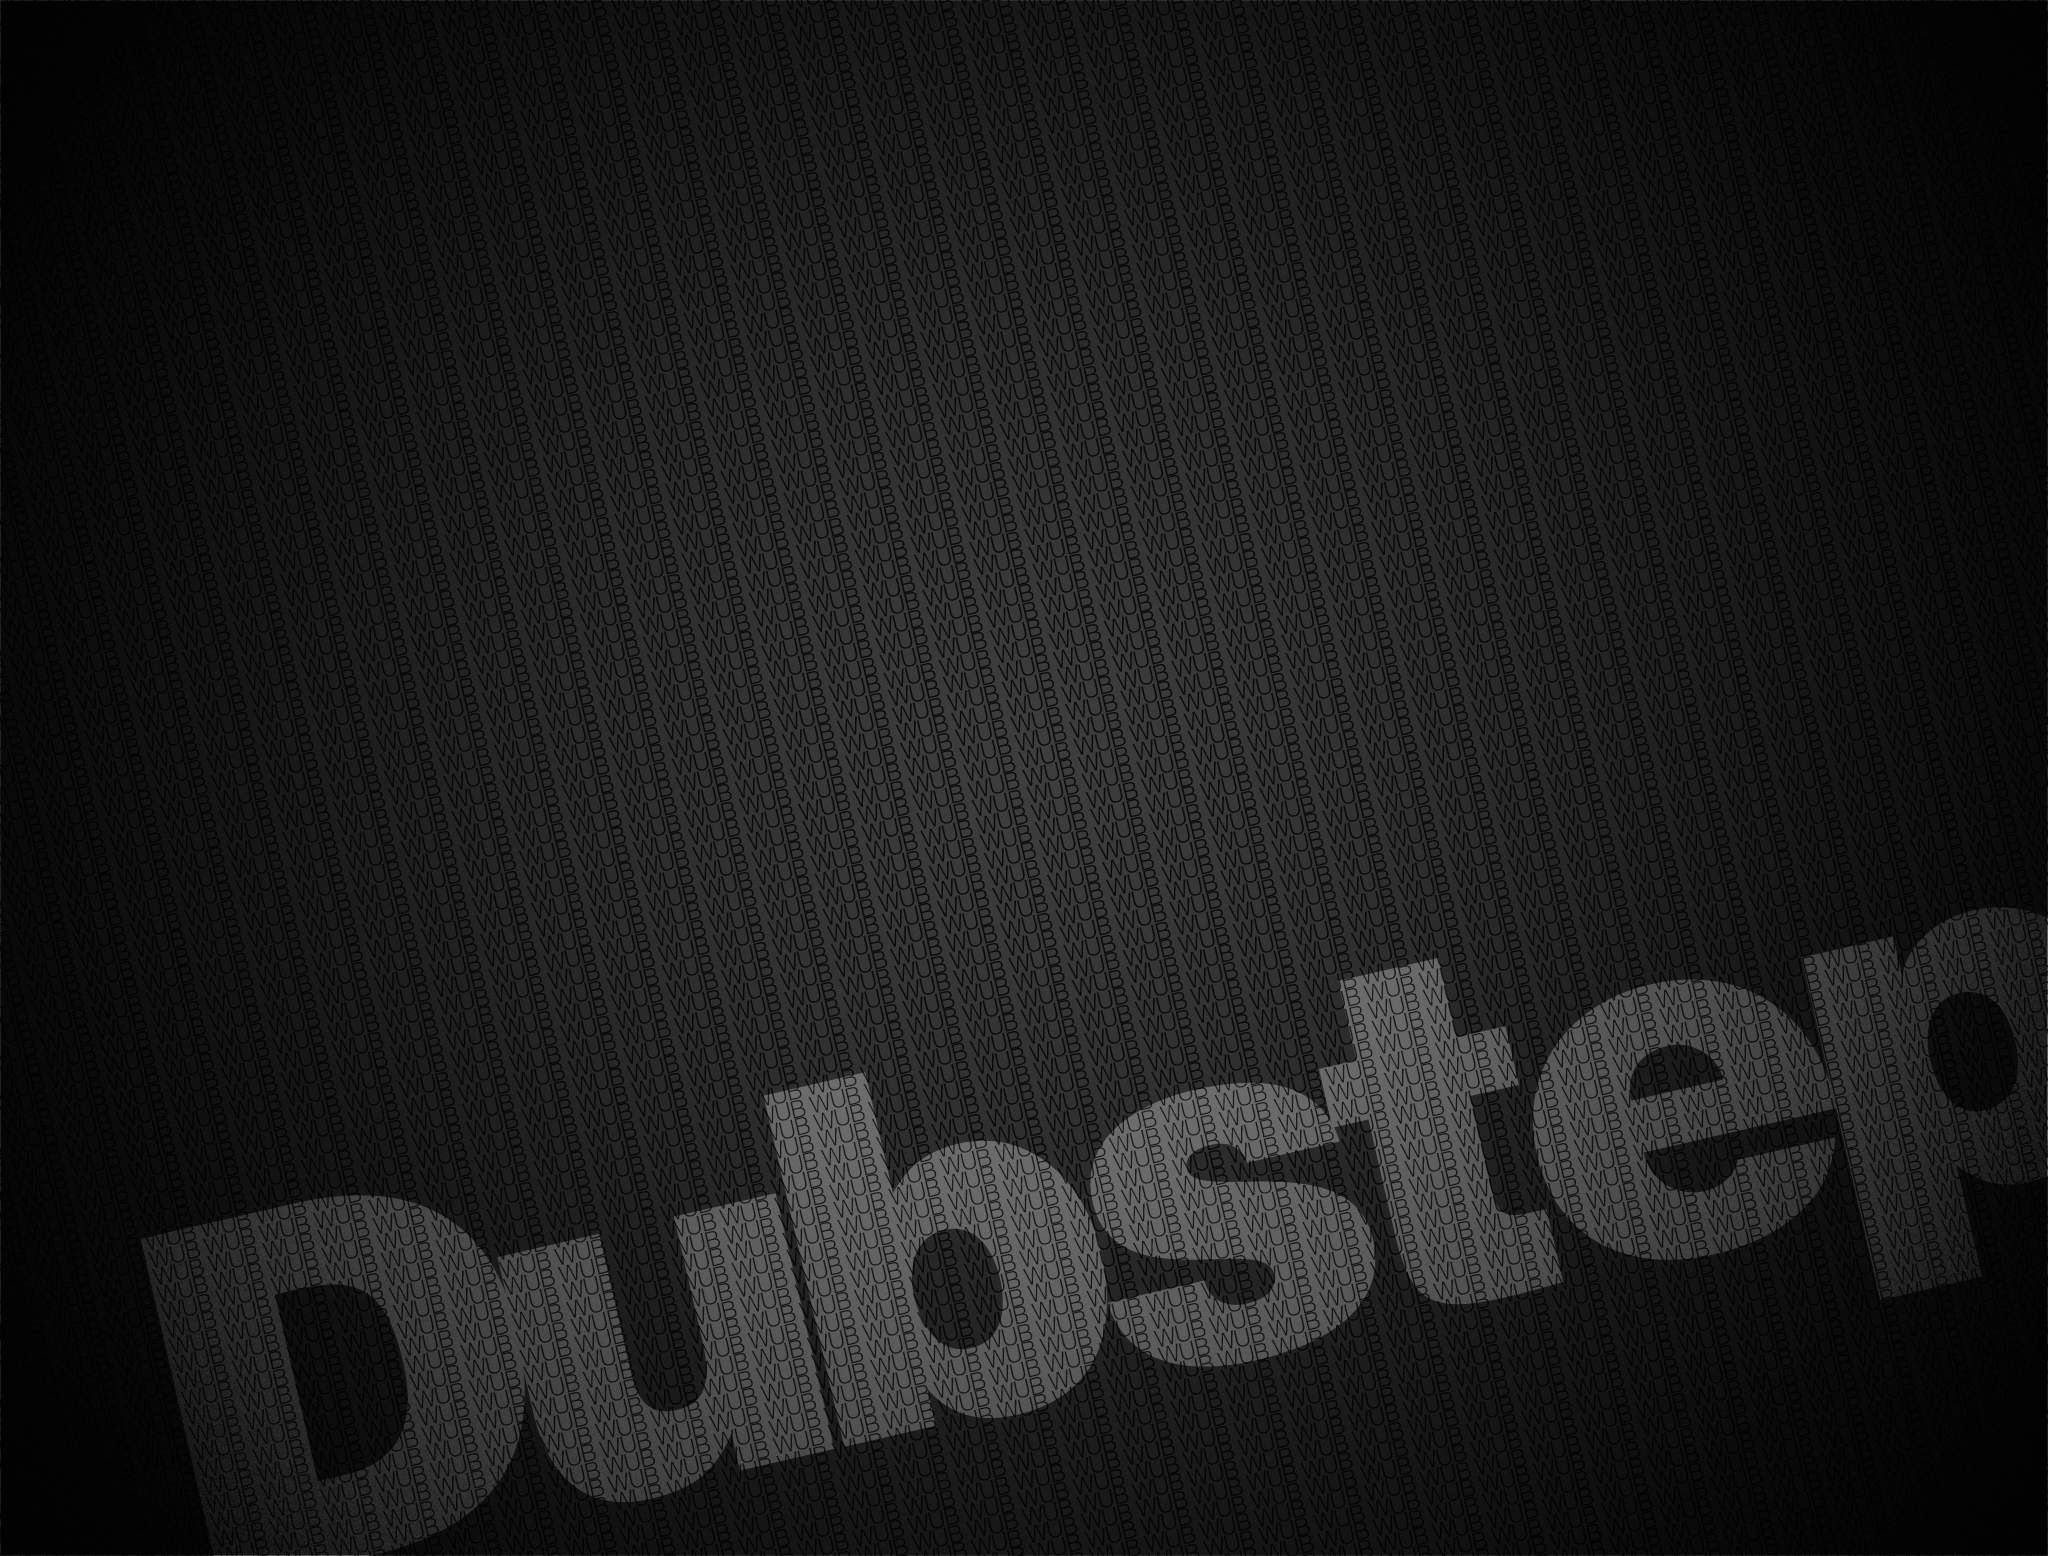 Dubstep HD Wallpapers